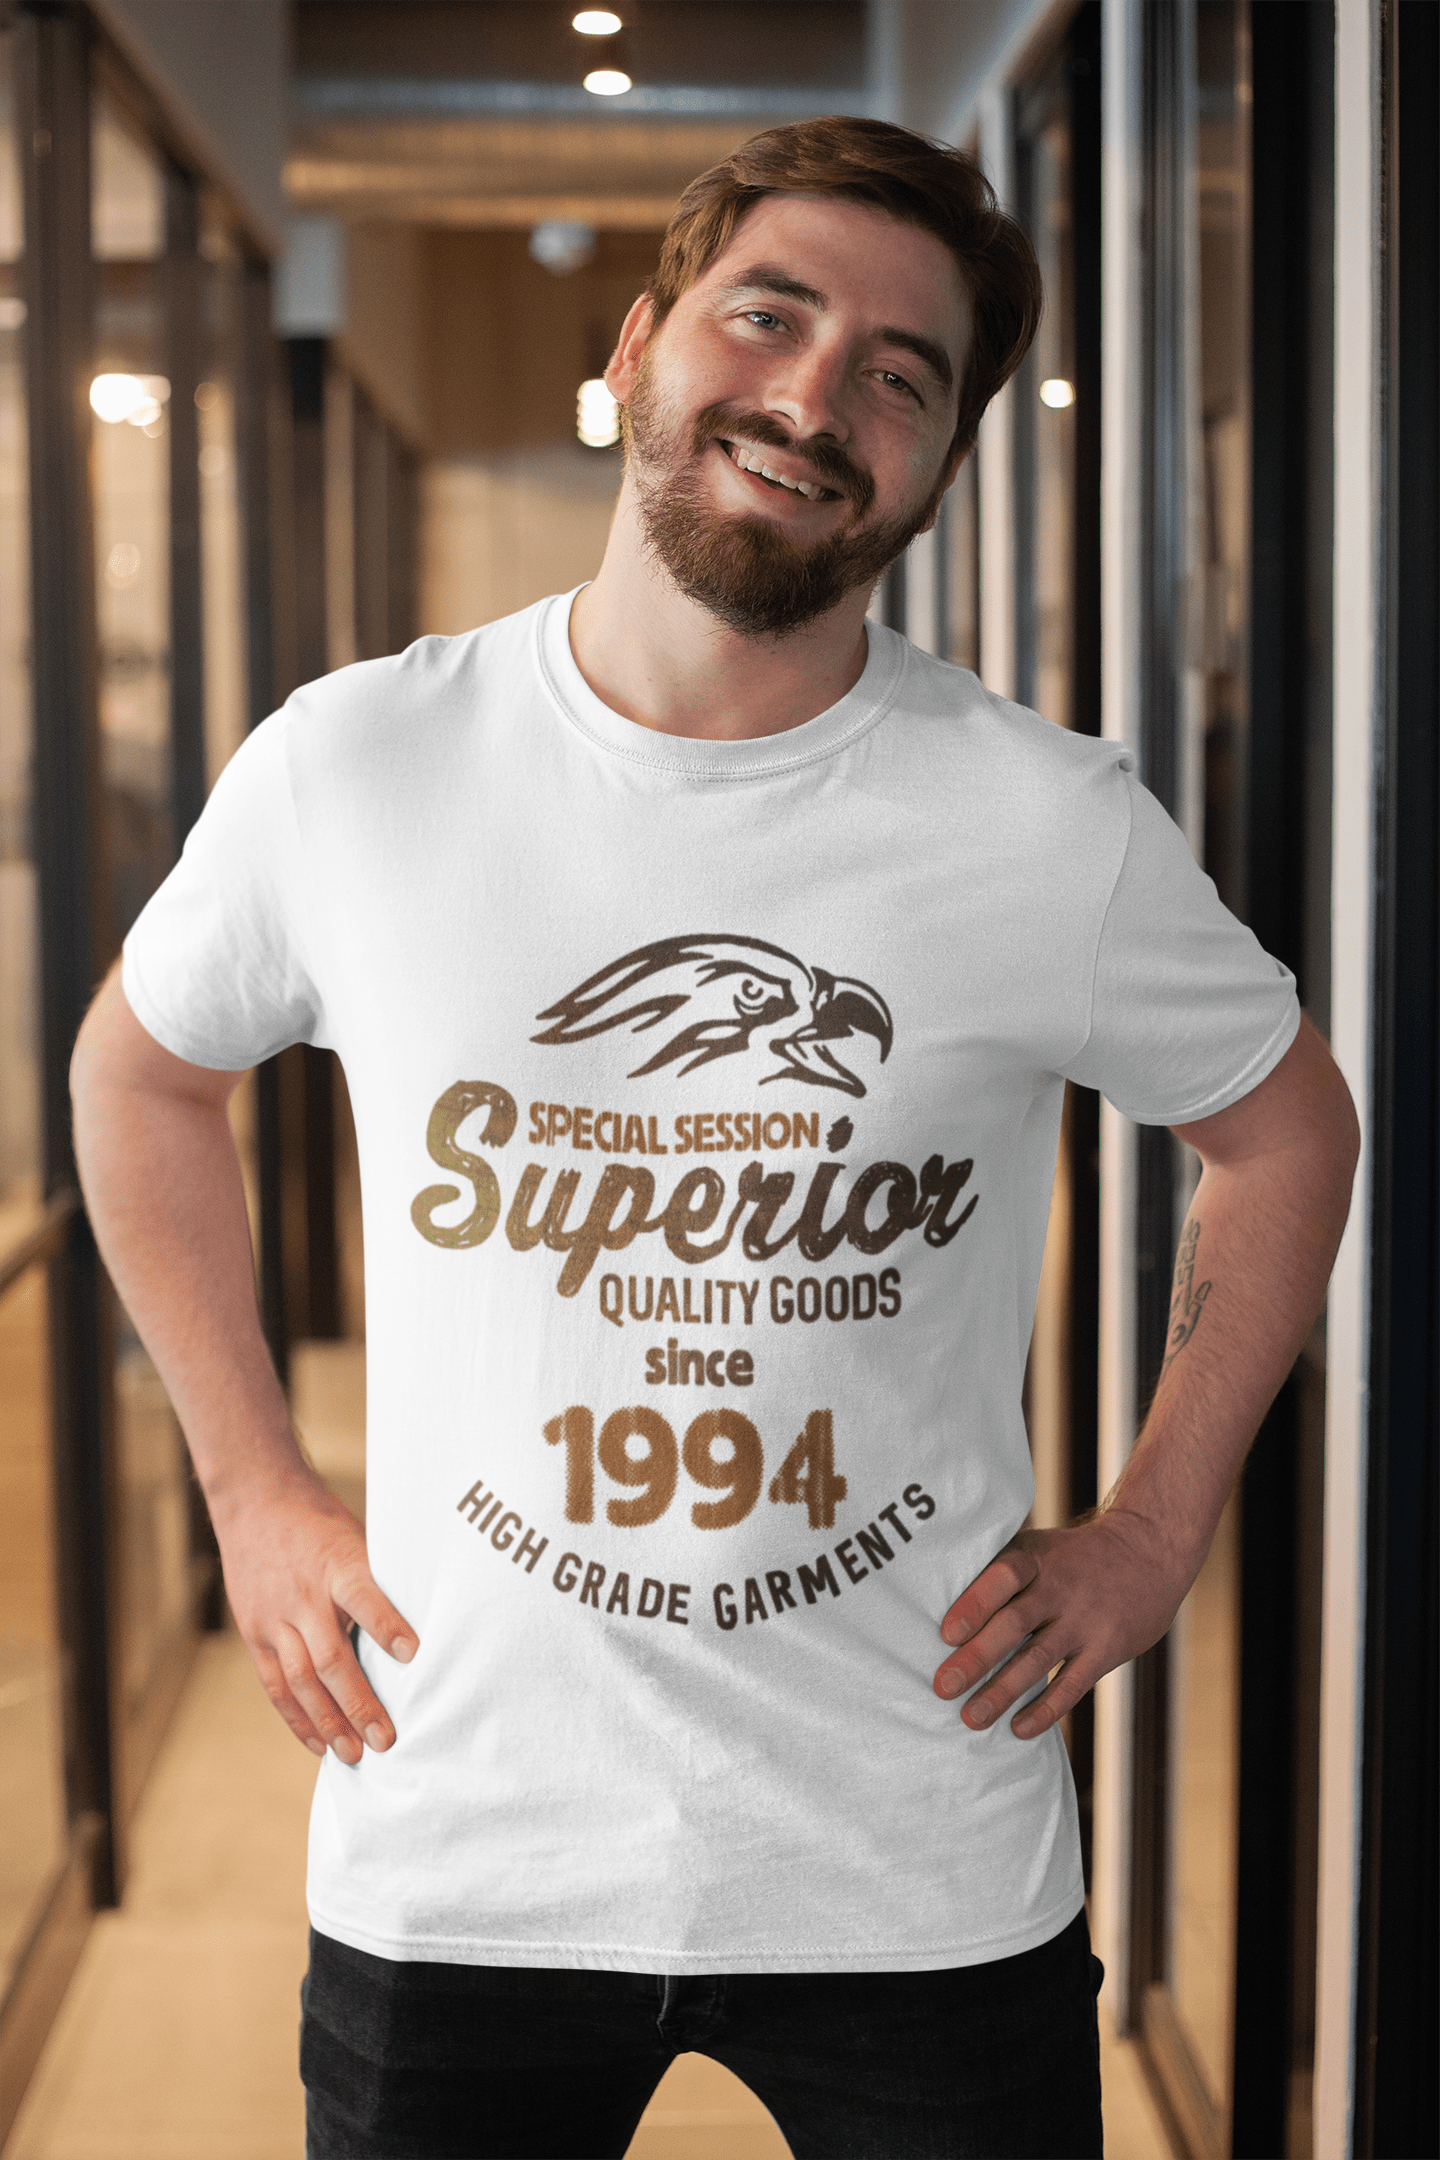 1994, Special Session Superior Since 1994 Men's T-shirt White Birthday Gift 00522